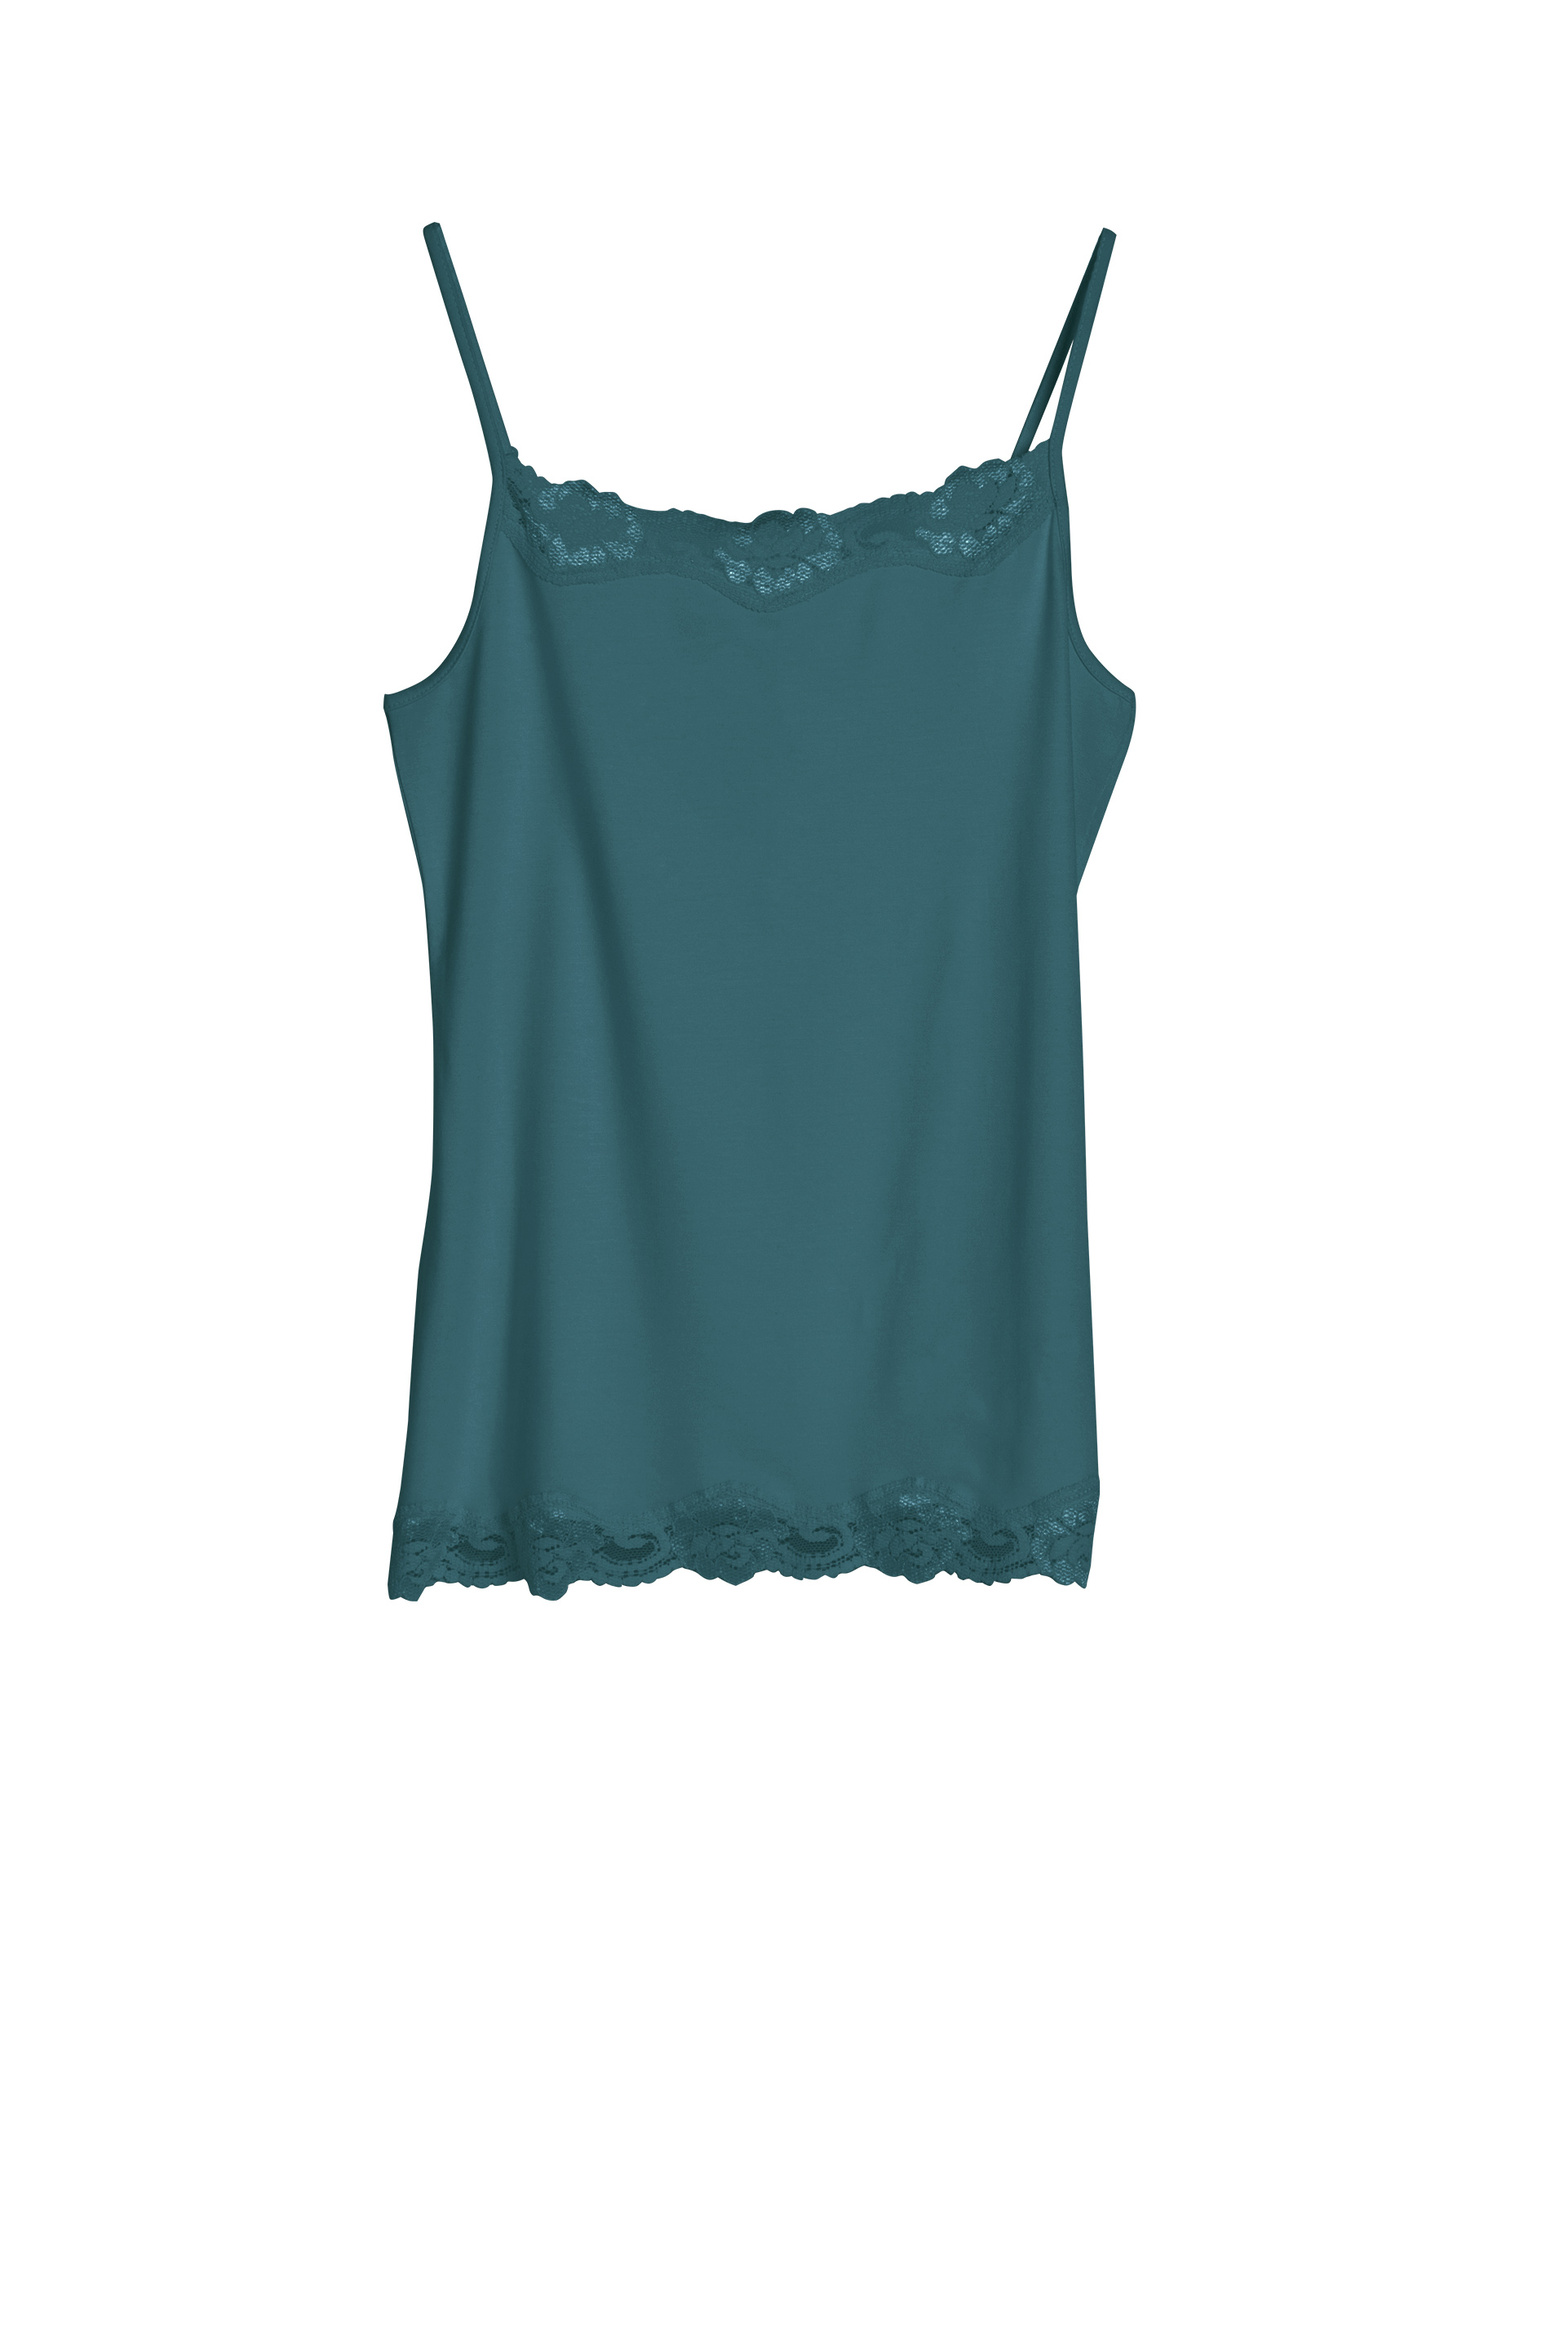 7200_lace_camisole_grey_teal.jpg